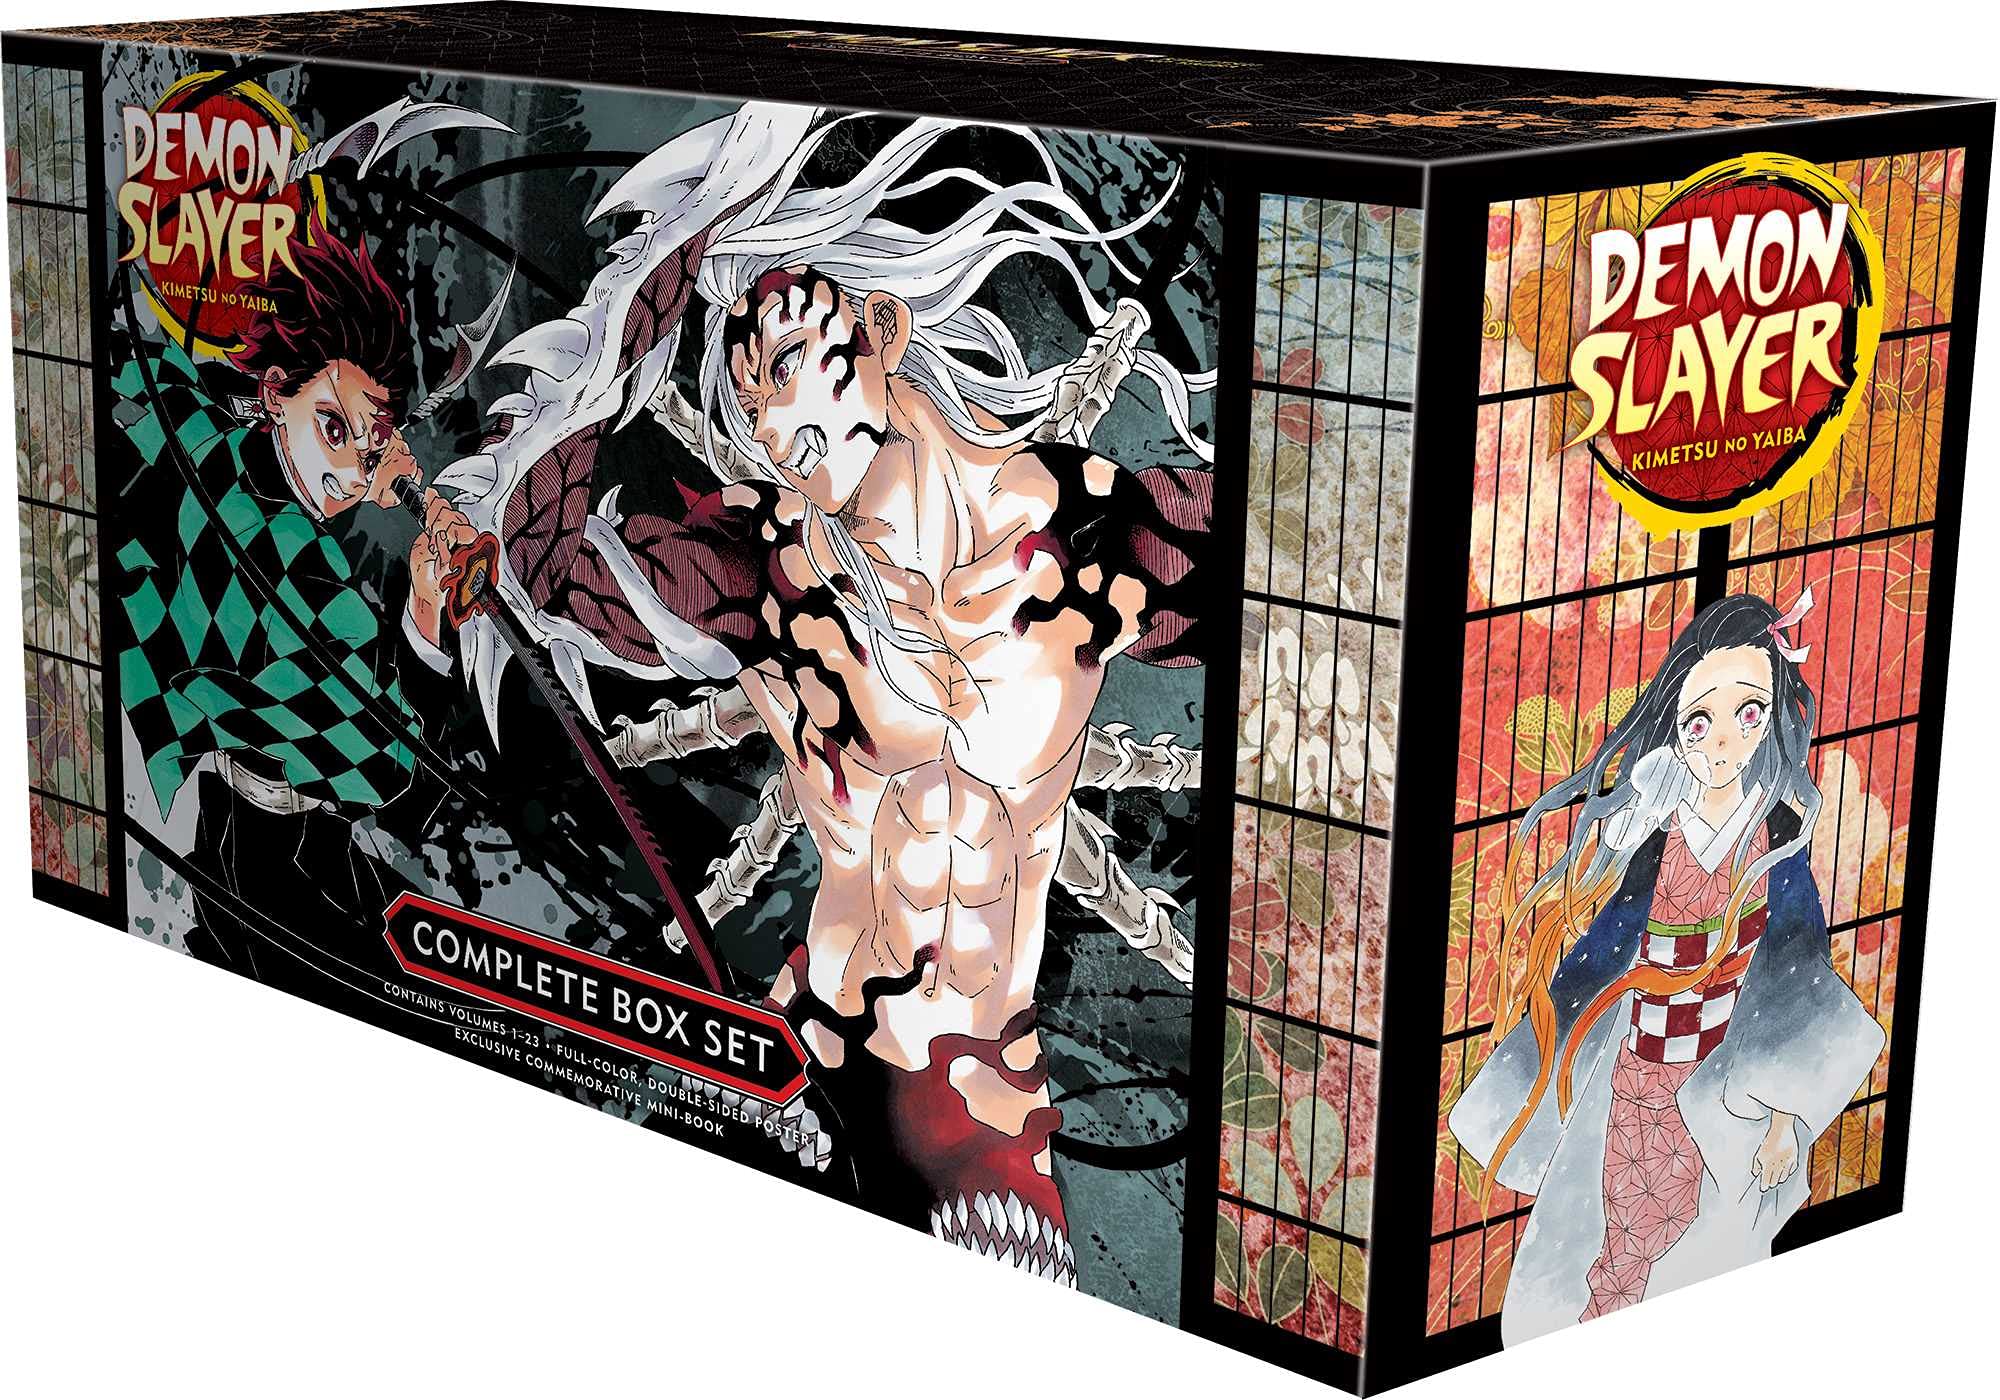 Has Manga Box Sets For The Best Prices We've Seen - GameSpot